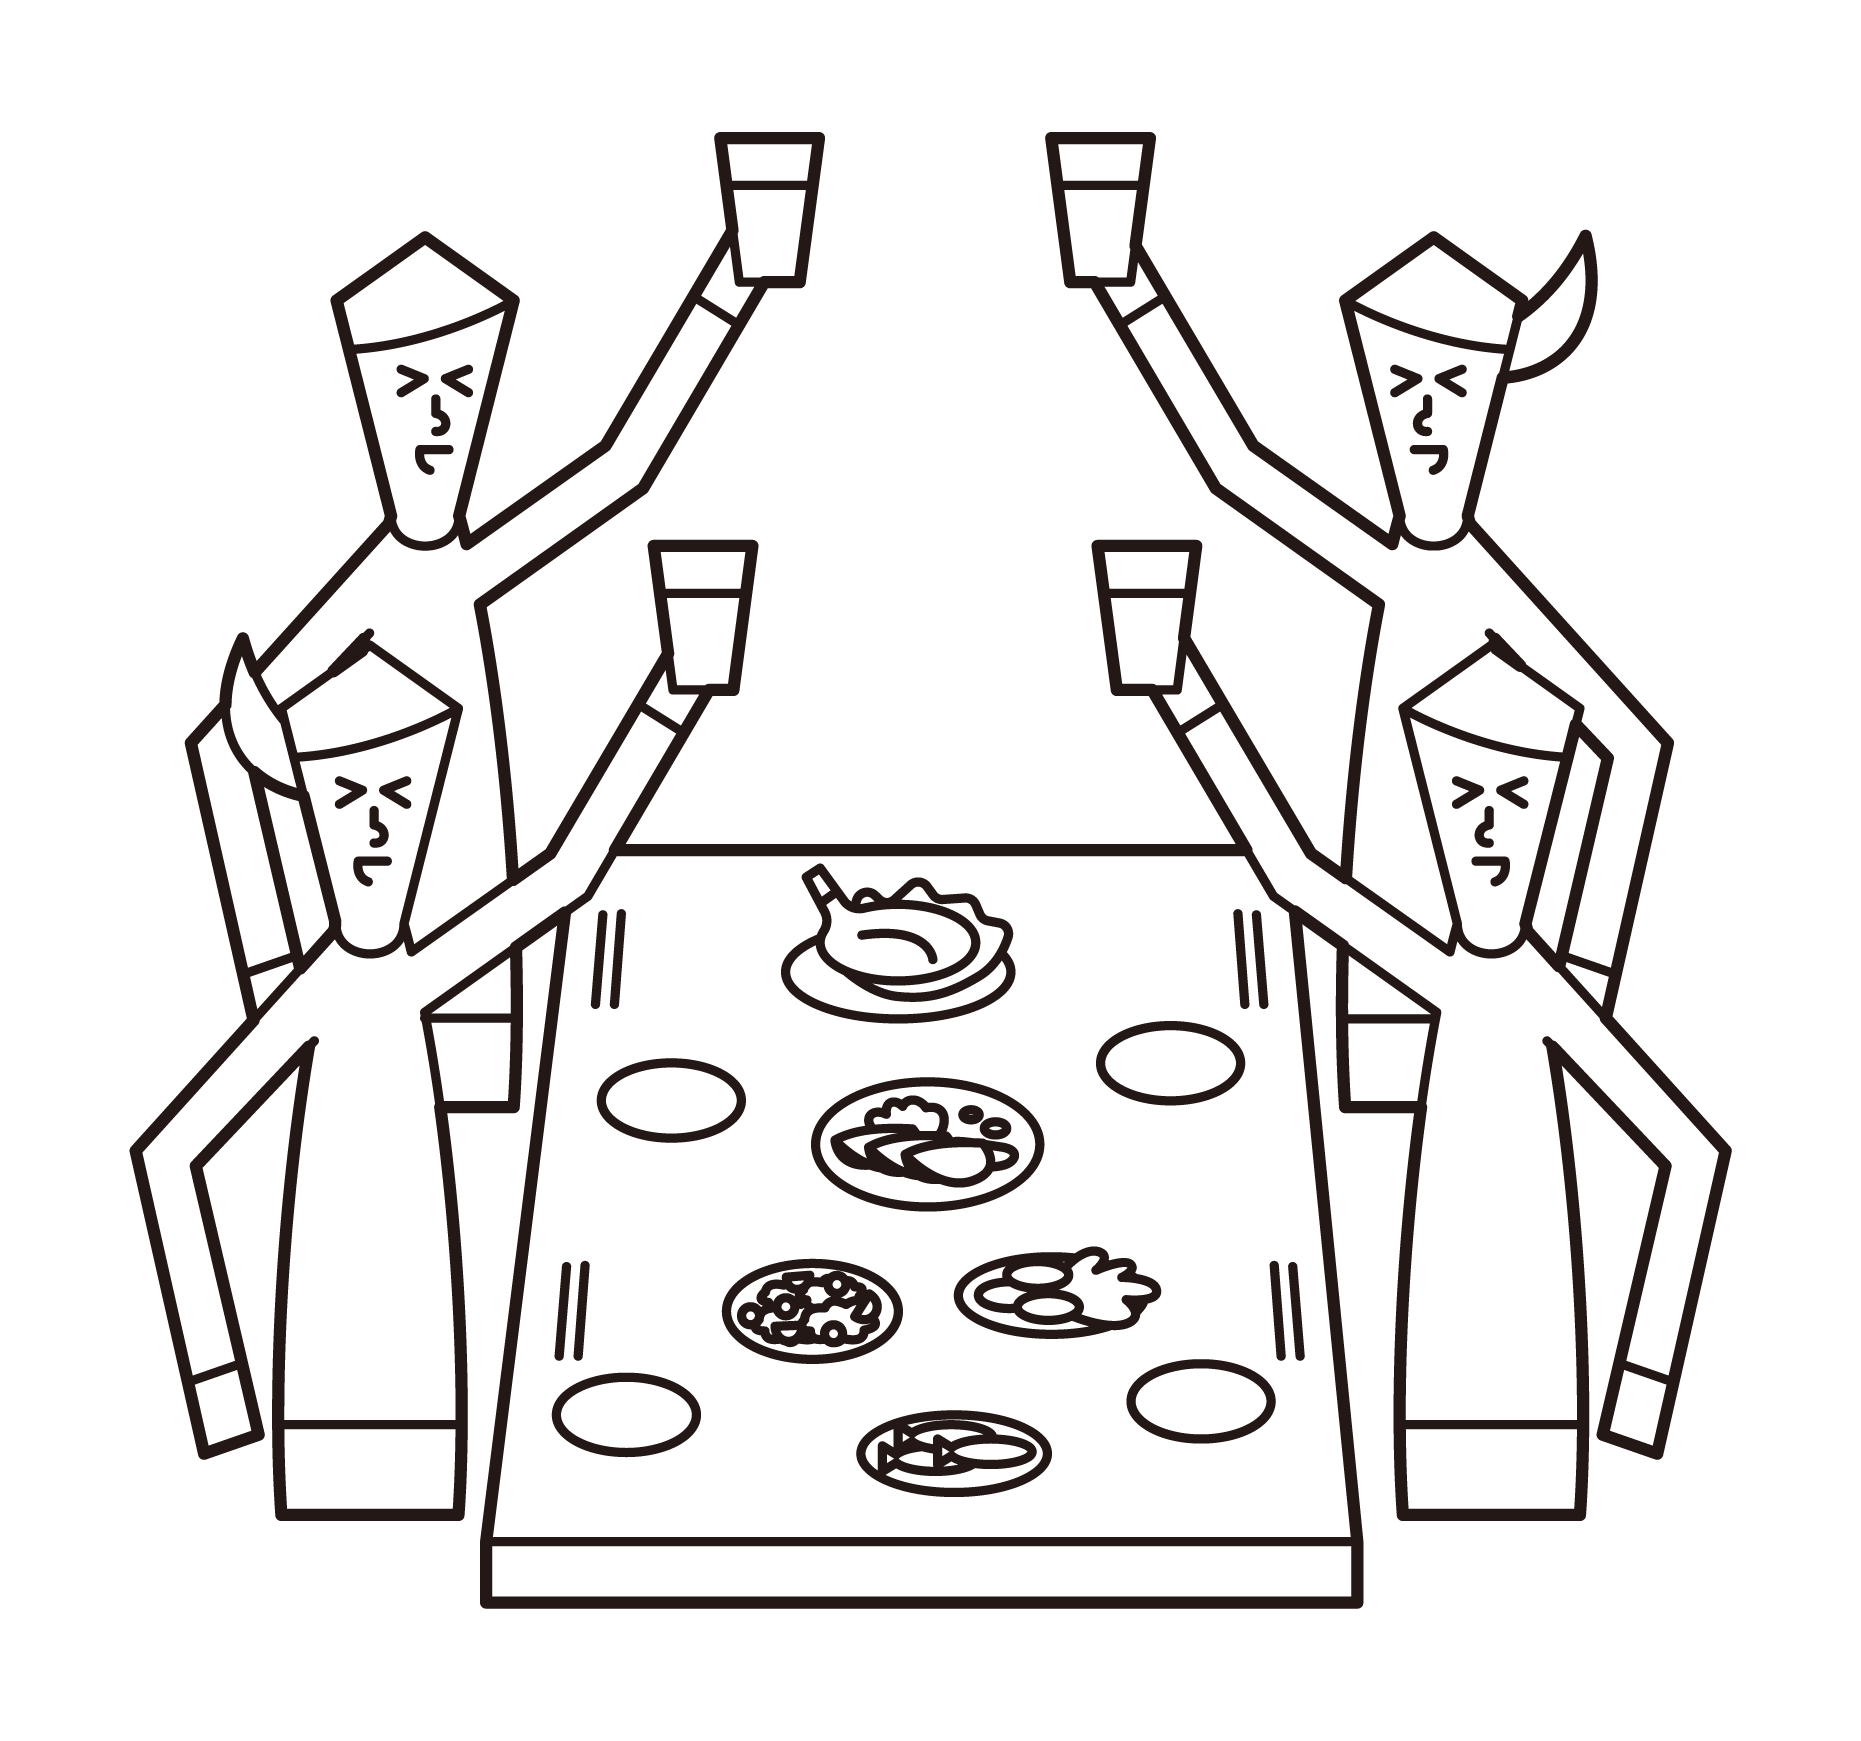 Illustration of people (men and women) toasting at a dinner party